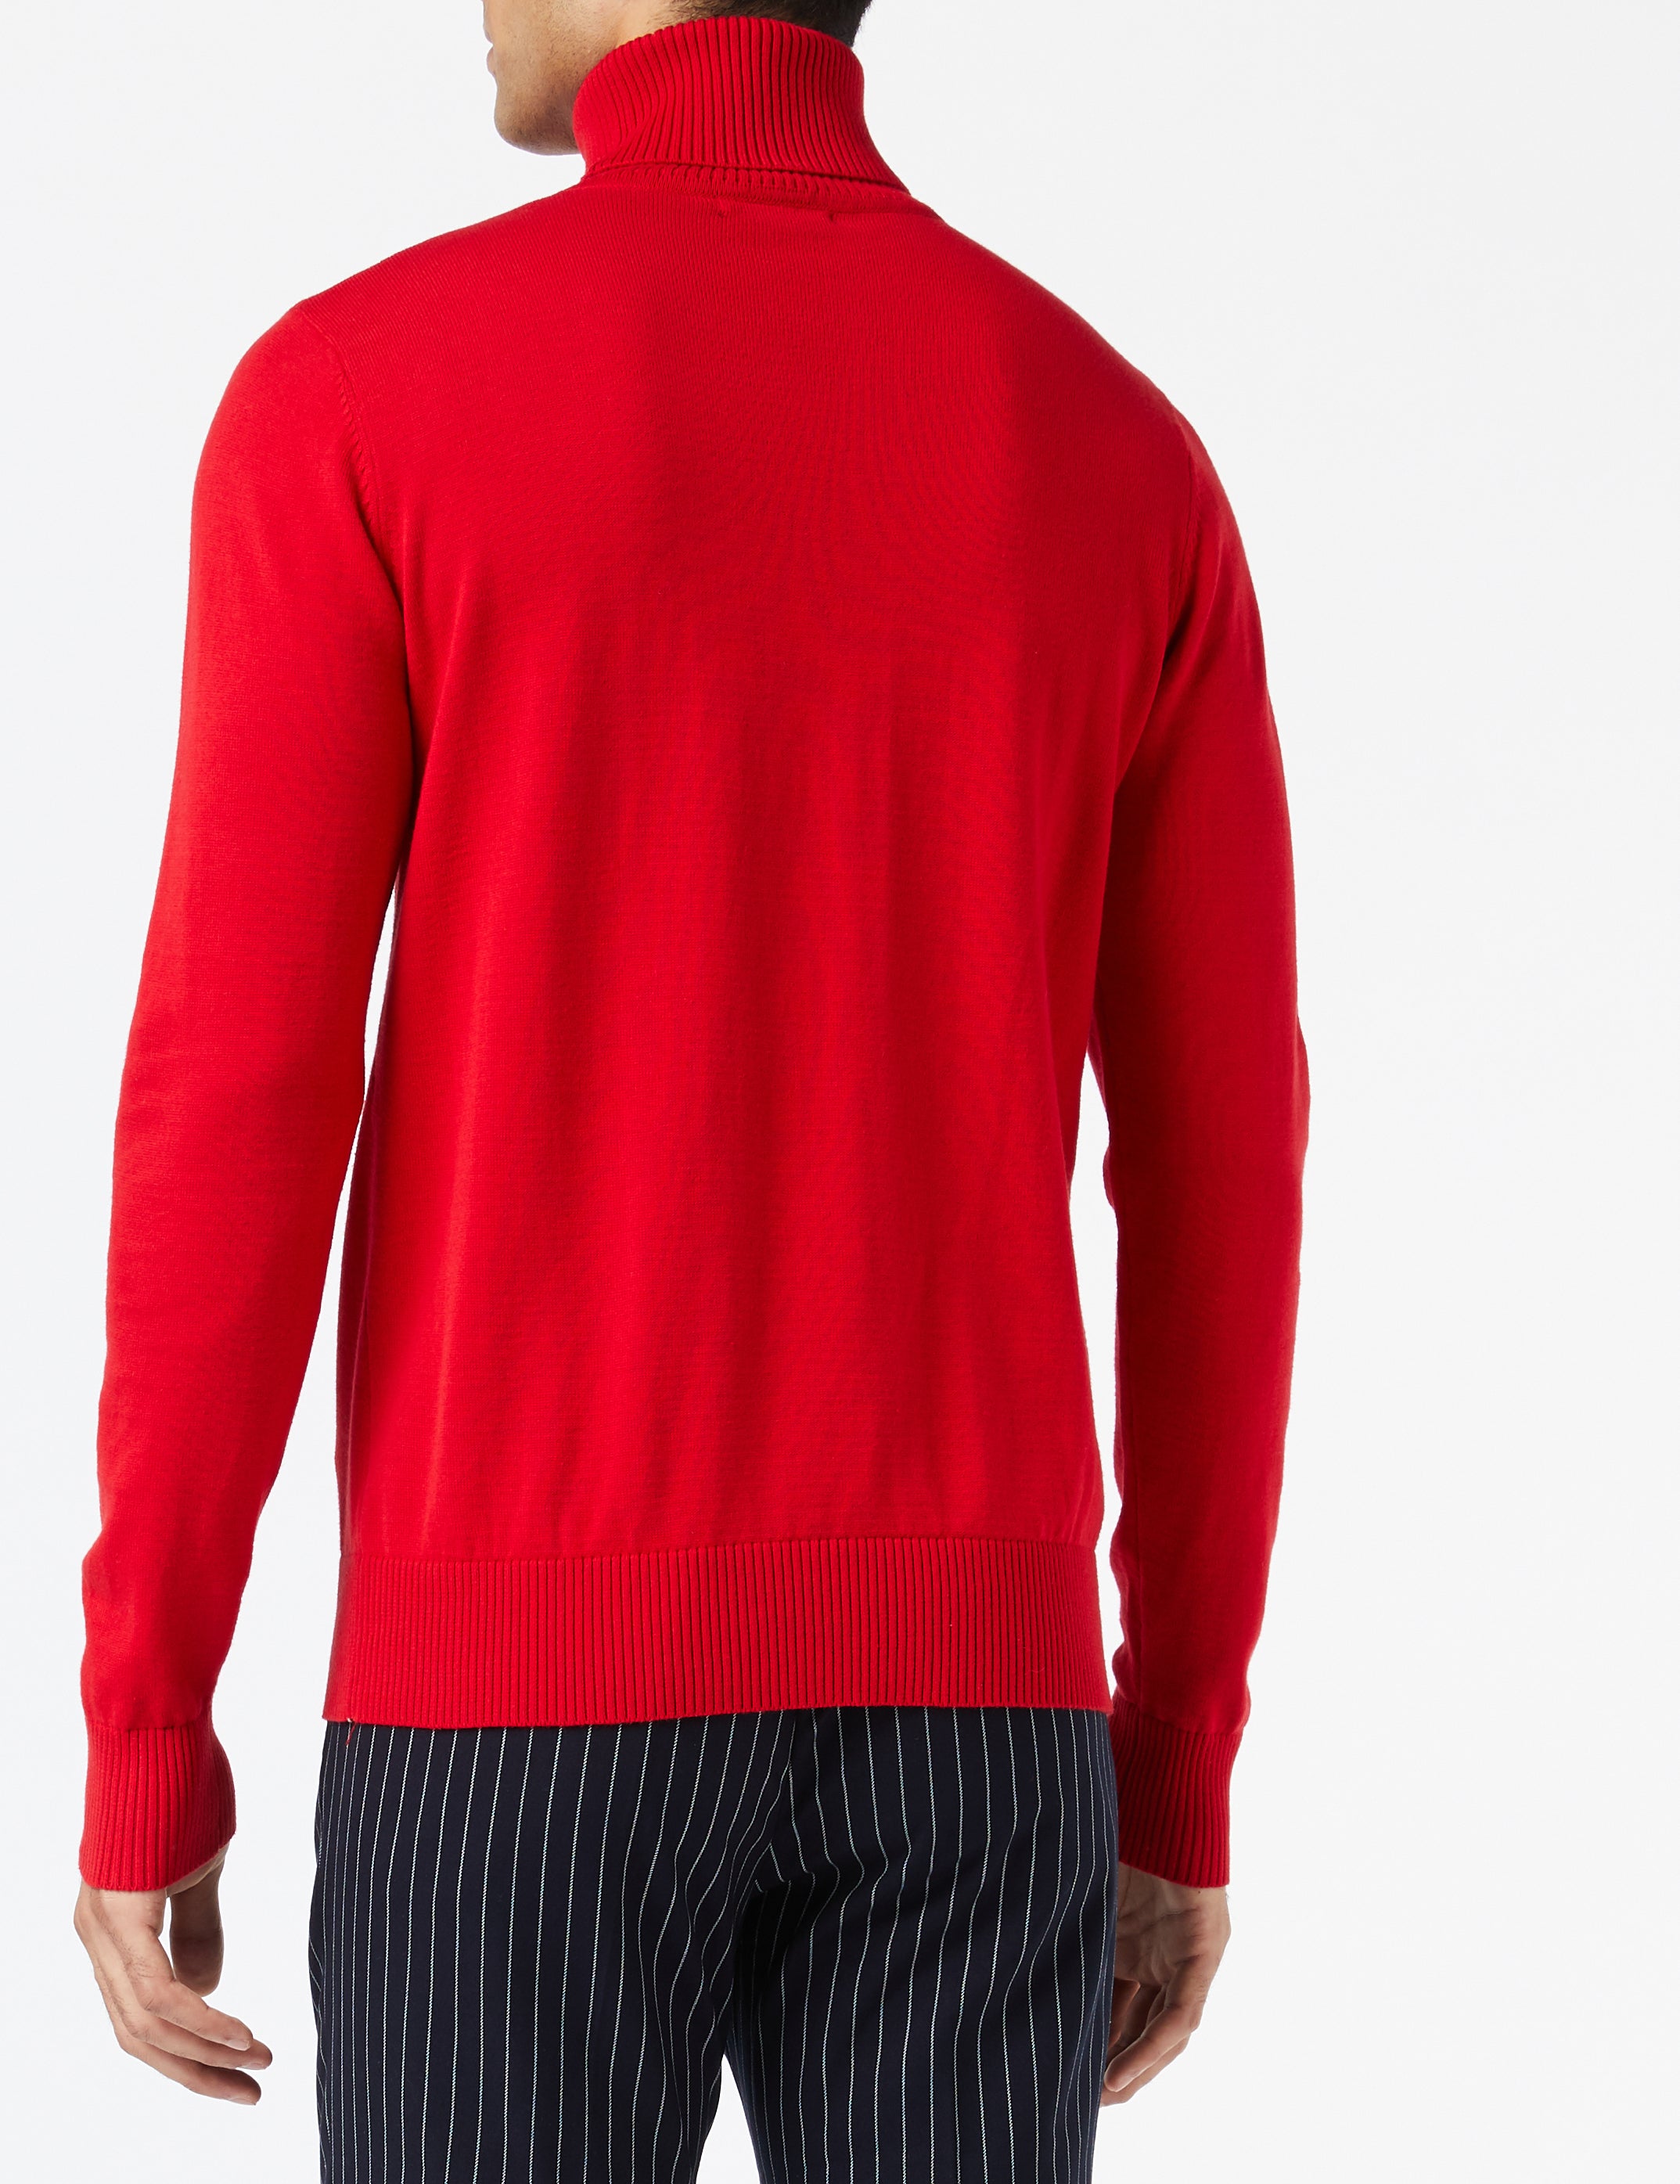 Mens Roll Neck Red Jumper Soft Cotton Fine Knitted